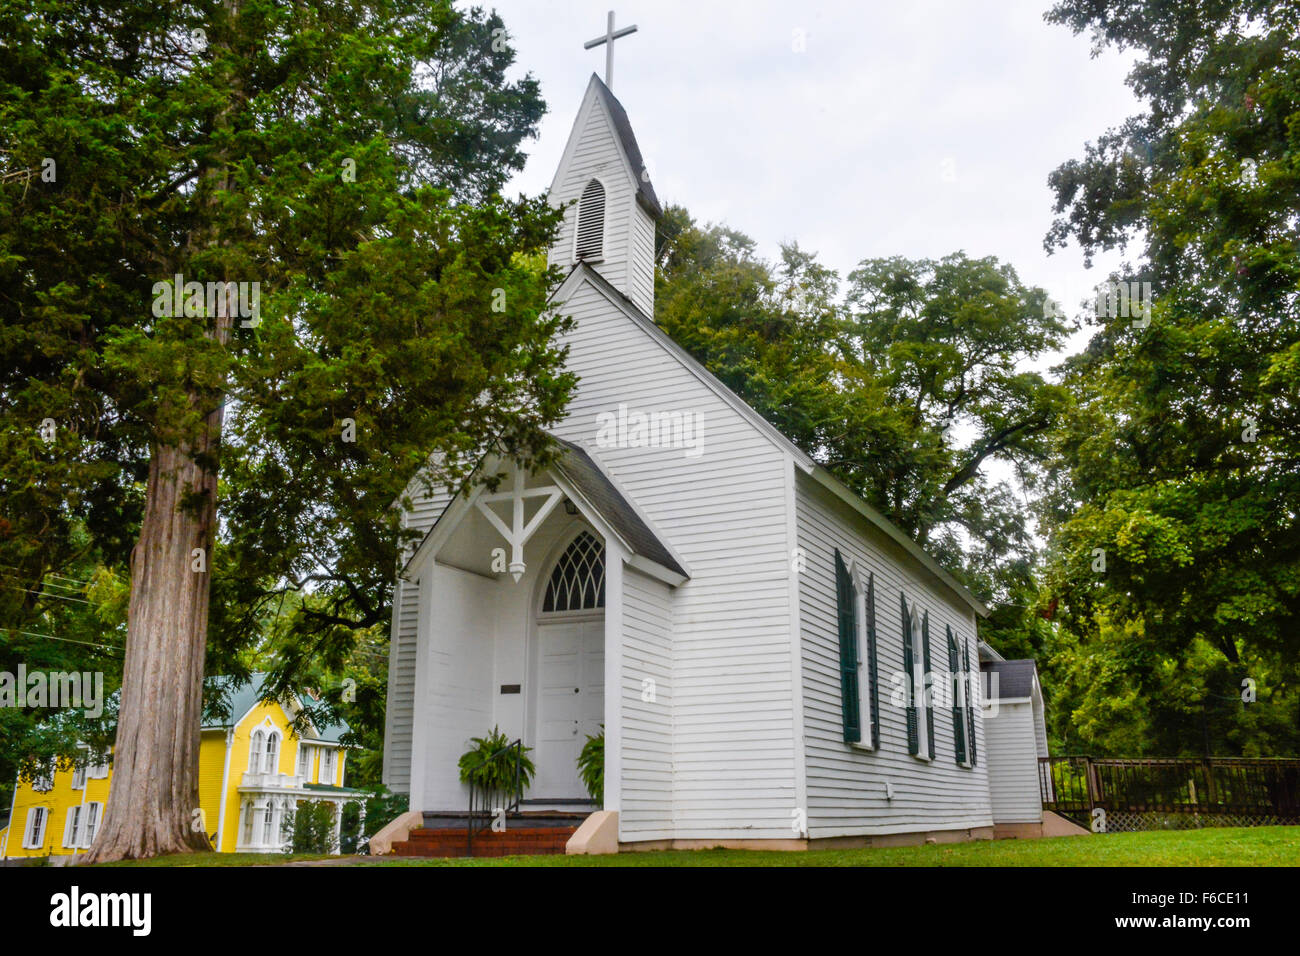 Small charming classic rural white clapboard church with steeple on property of St. James Episcopal Church in Bolivar TN Stock Photo